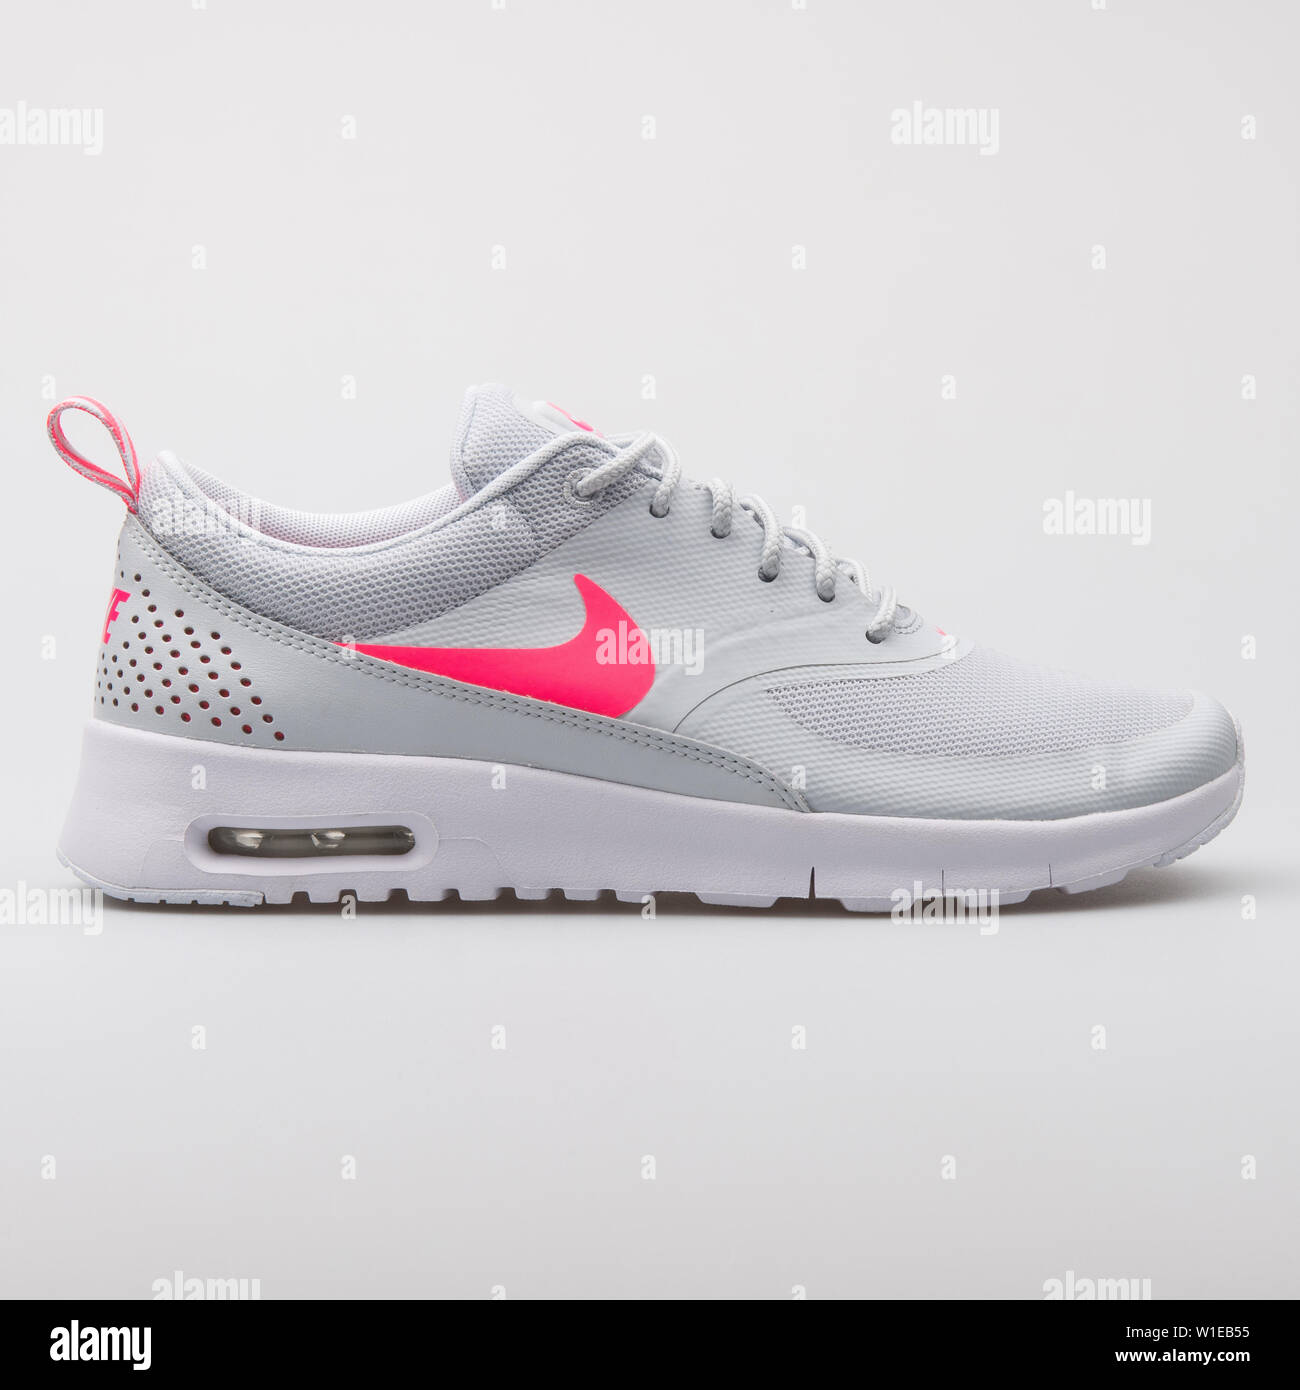 VIENNA, AUSTRIA - AUGUST 7, 2017: Nike Air Max Thea grey and pink sneaker  on white background Stock Photo - Alamy